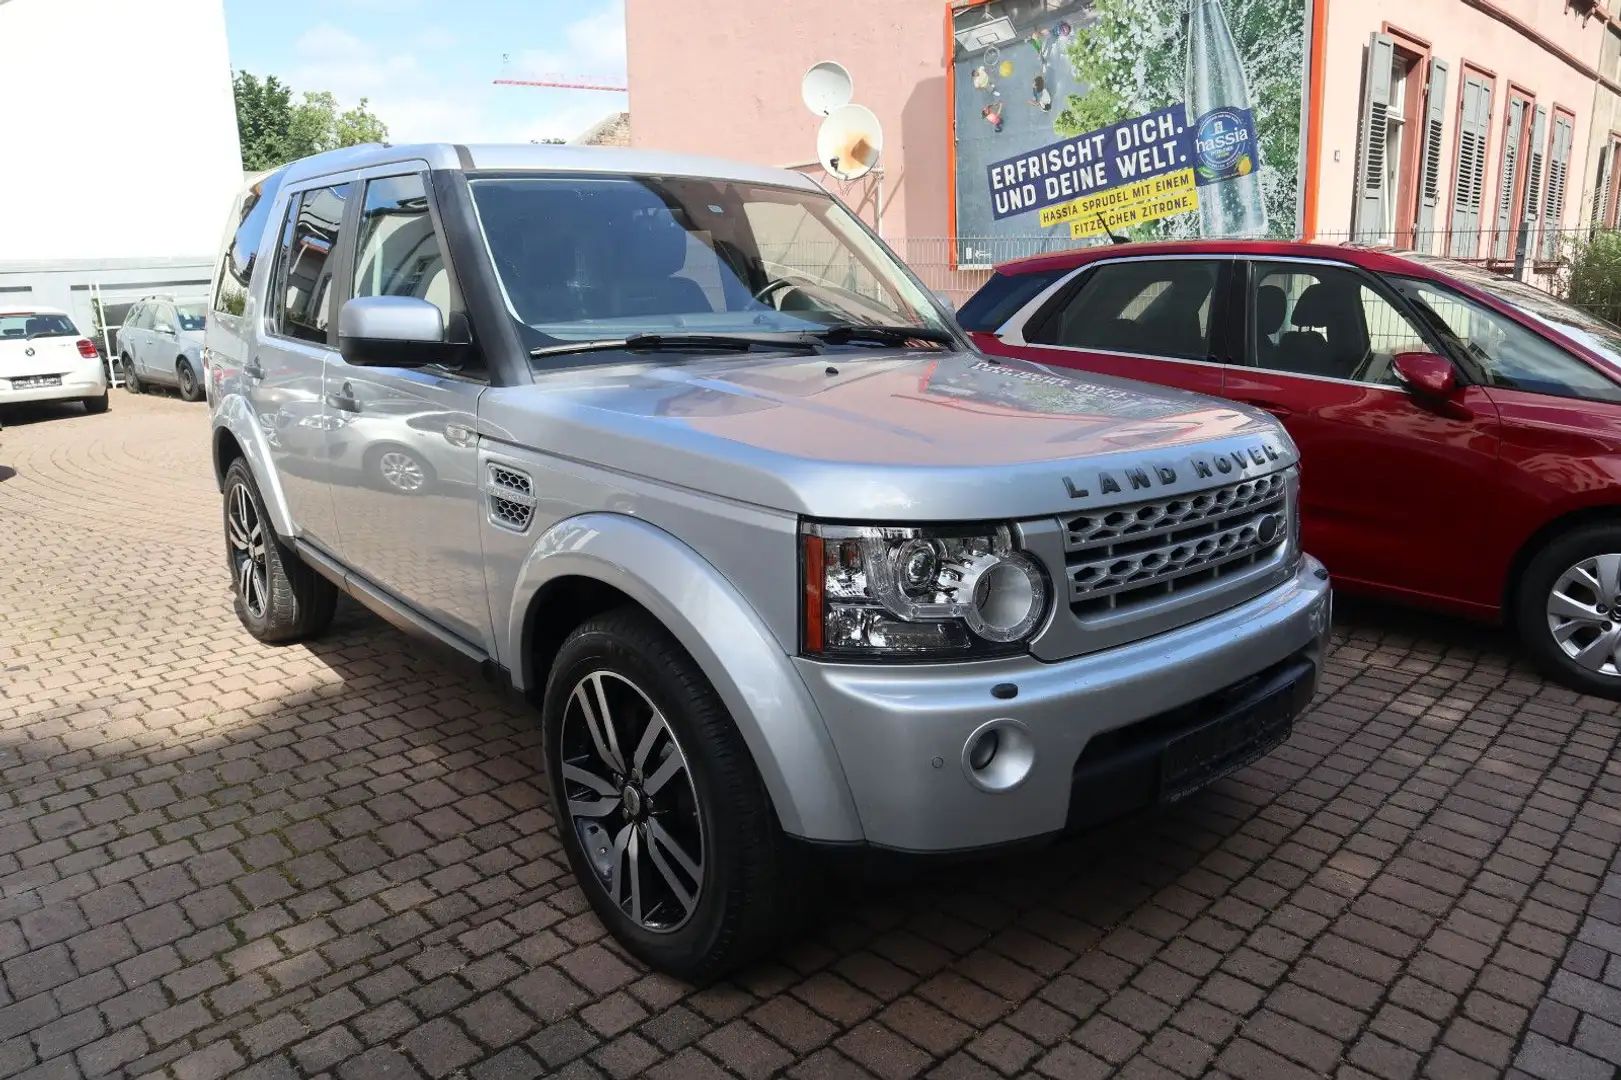 Land Rover Discovery 4 5.0 V8 HSE 7-Sitzer/Leder/Xenon/Pano Argent - 1